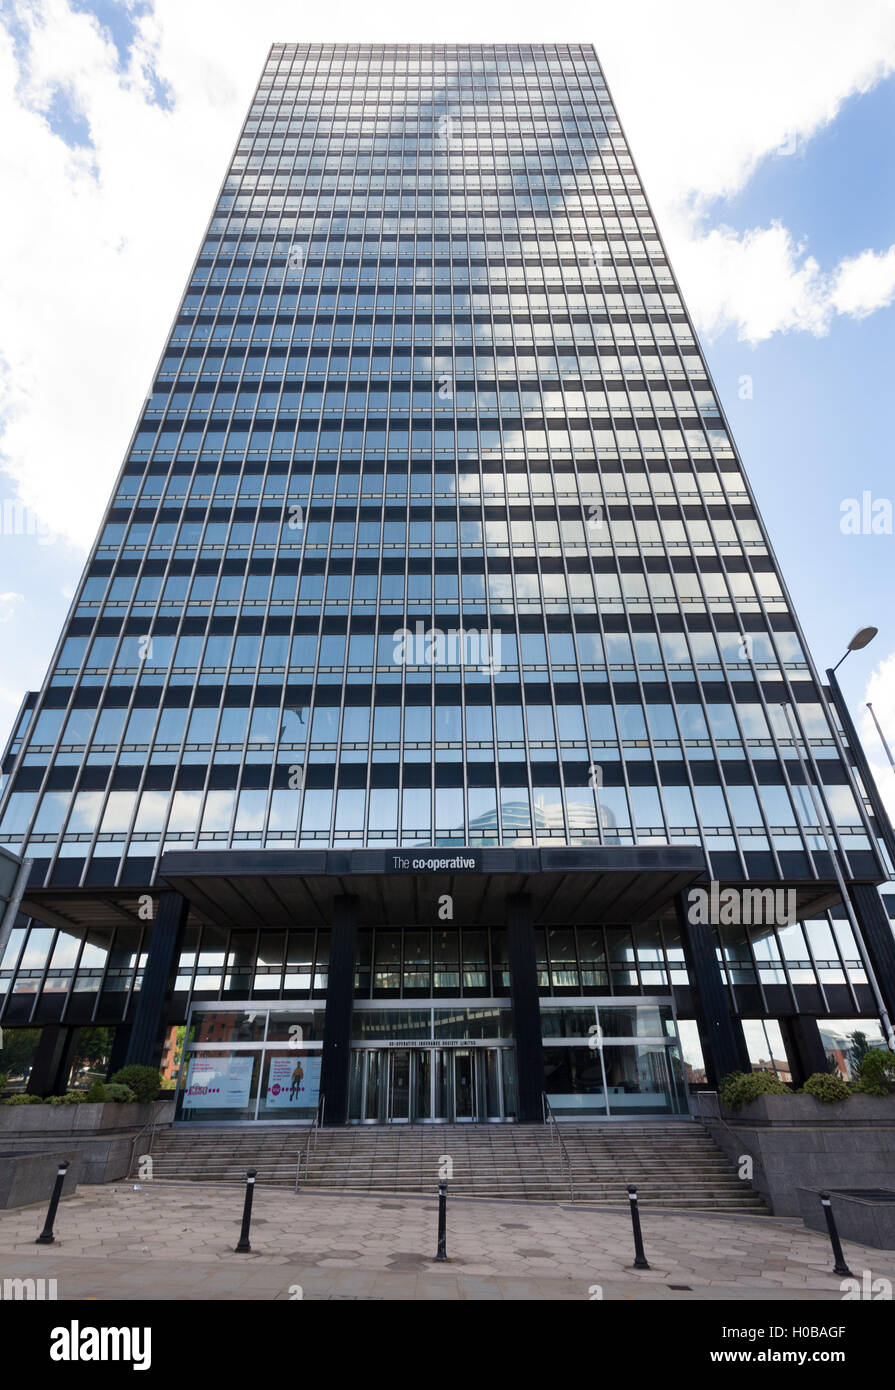 The headquarters of the CIS Insurance Group, Manchester, built in 1962 it was briefly the tallest building in the UK. Stock Photo